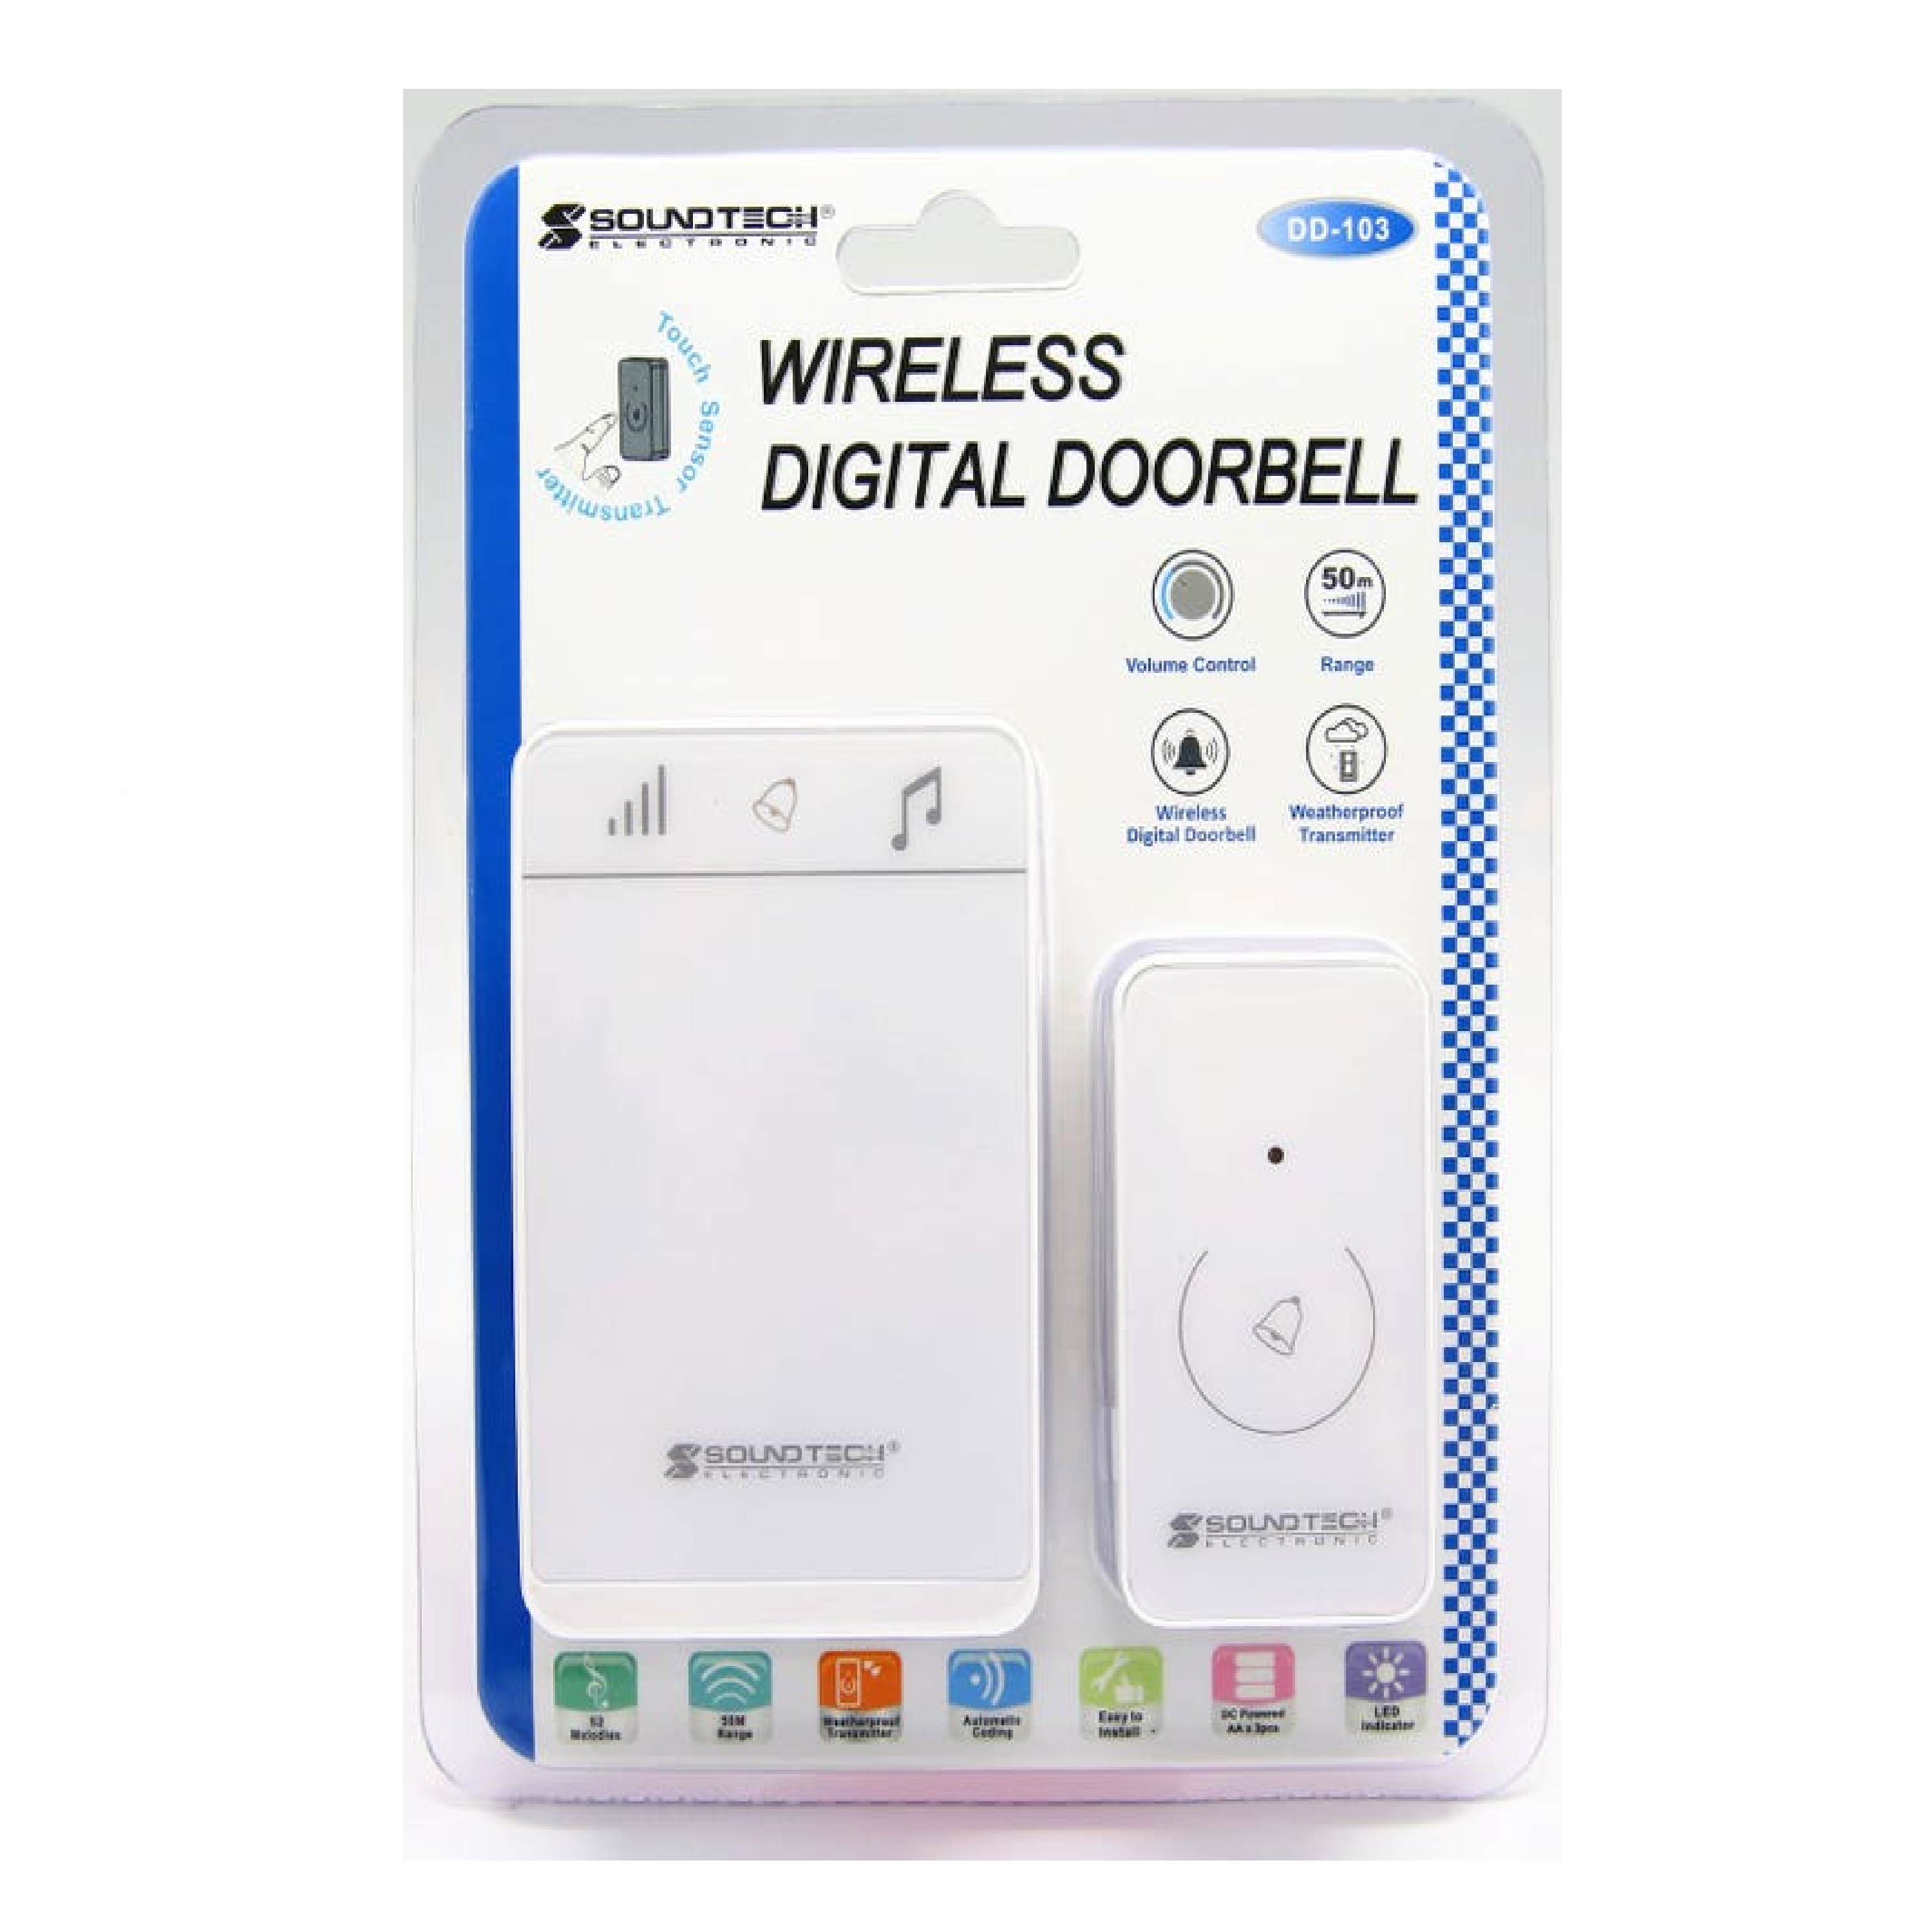 Soundteoh DD-103 WIRELESS Doorbell BATTERY OPERATED